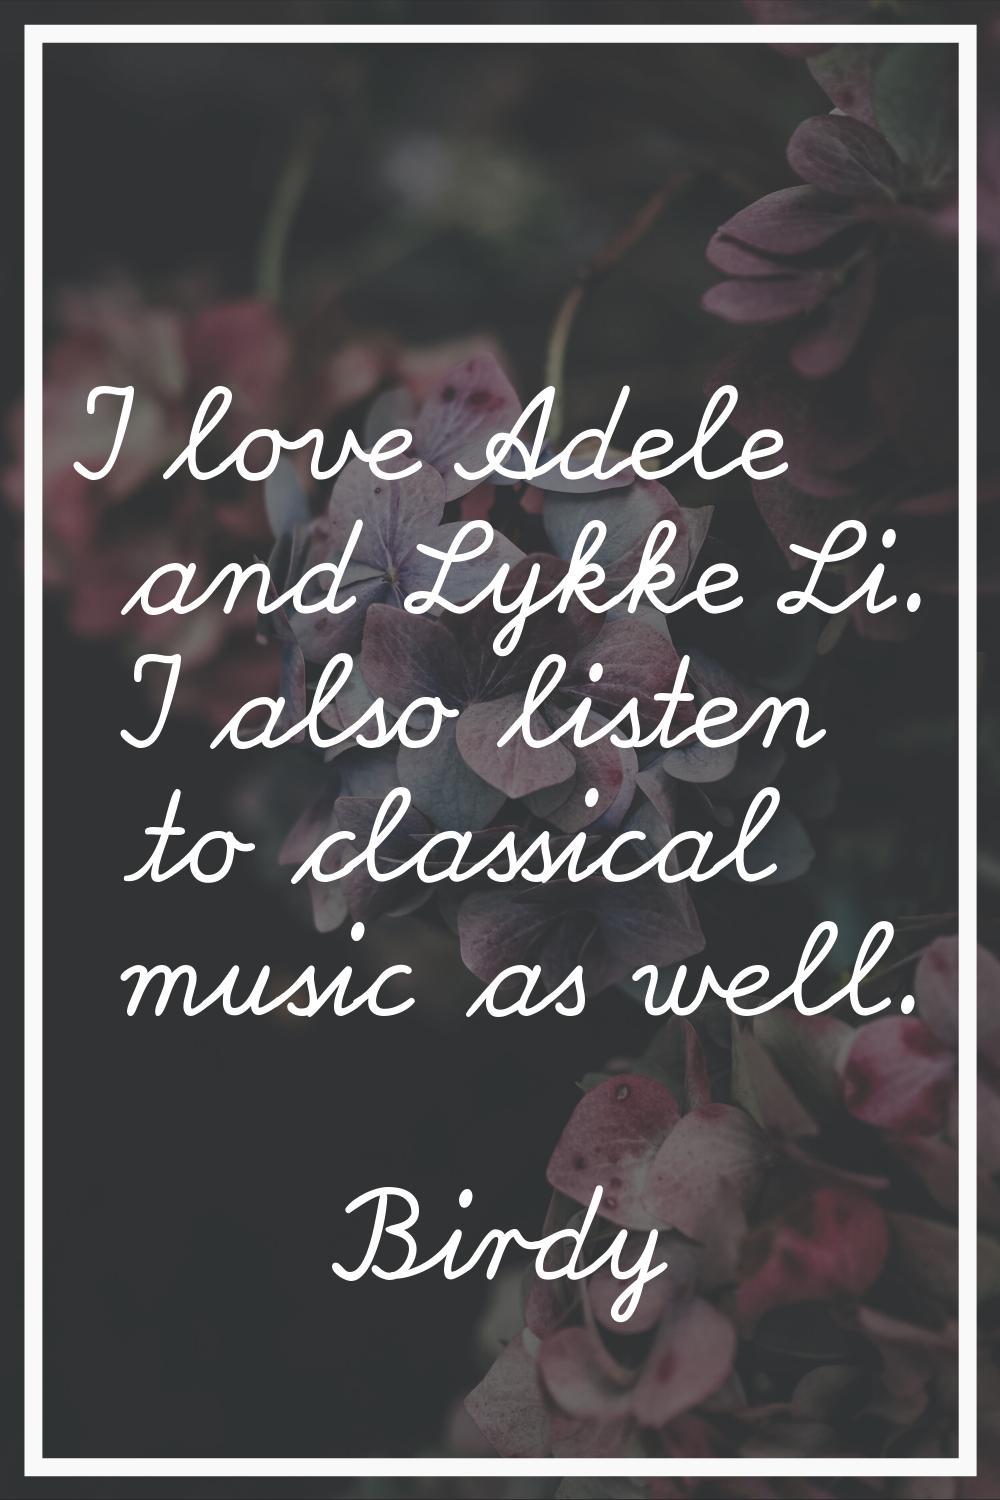 I love Adele and Lykke Li. I also listen to classical music as well.